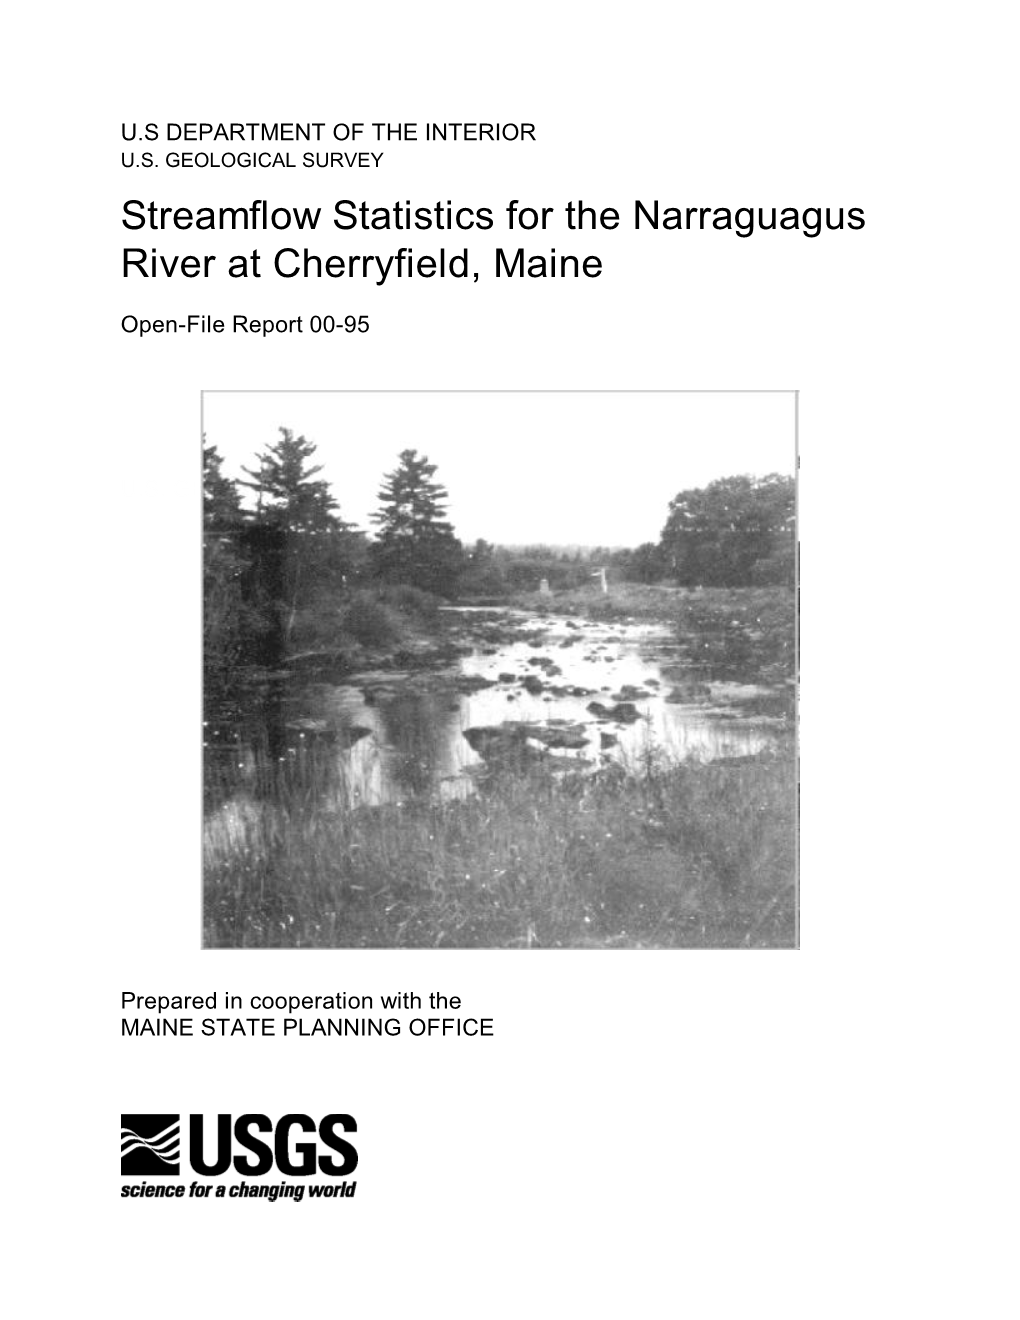 Streamflow Statistics for the Narraguagus River at Cherryfield, Maine